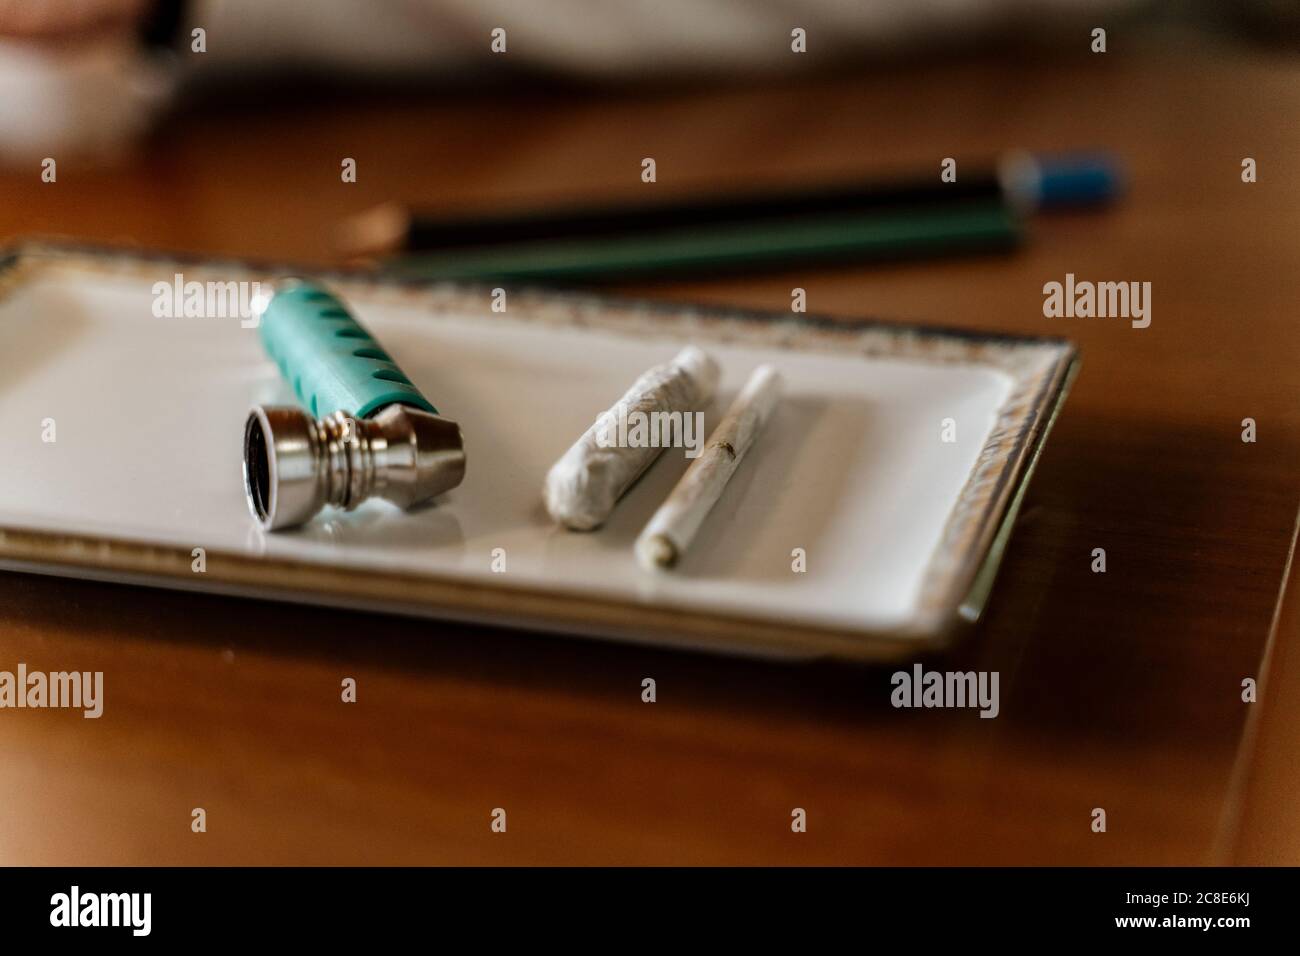 Close-up of marijuana joints and pipe in tray on table Stock Photo